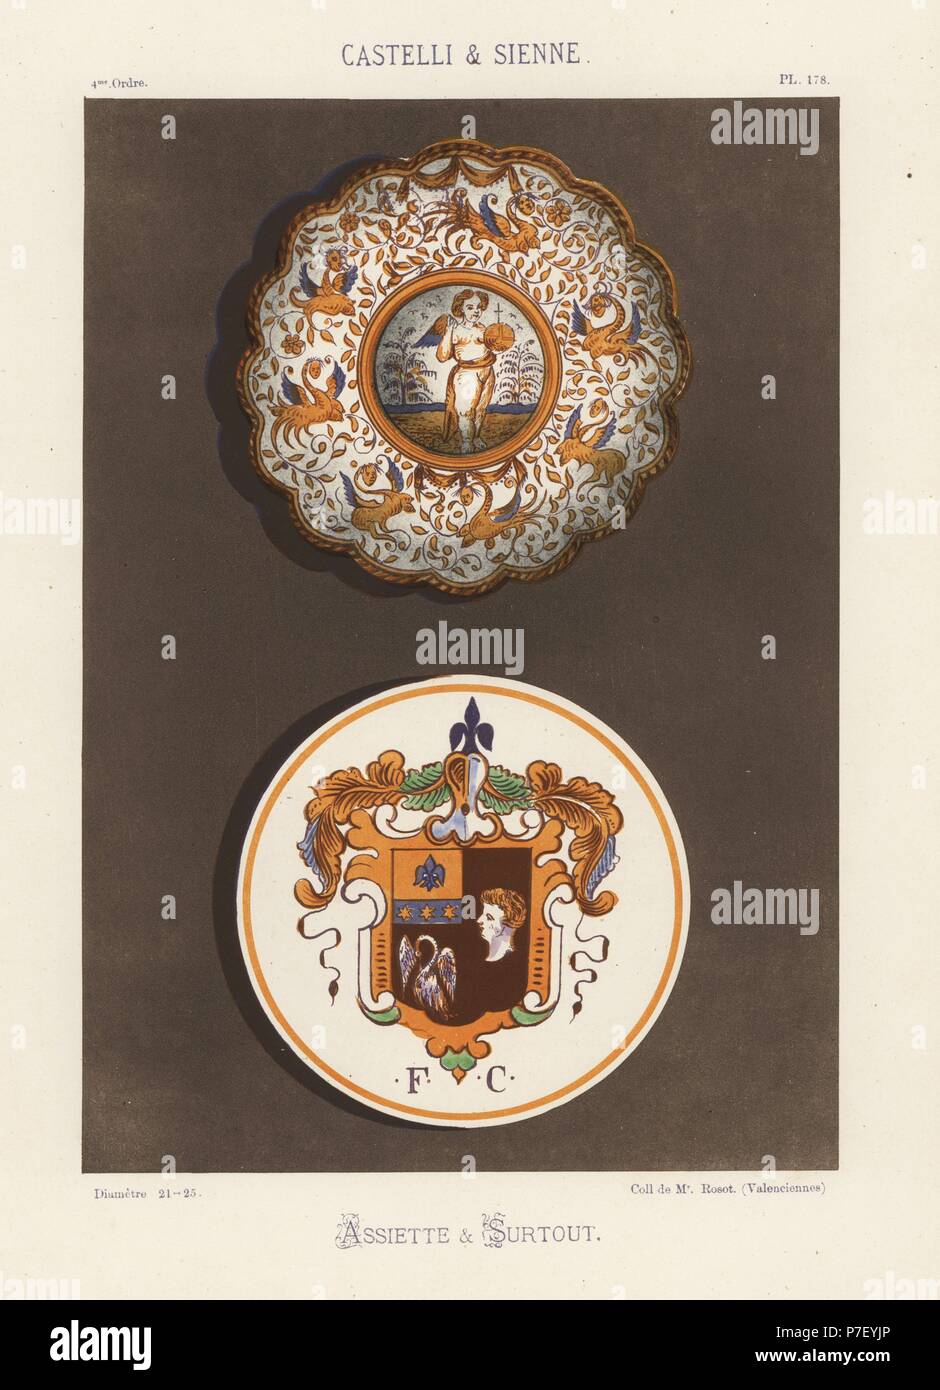 Plate and centerpiece from Castelli and Sienna, Renaissance maiolica ware. Decorated with an angel holding an orb in a border of chimaera and foliage, and heraldic escutcheon with the initials F.C. Hand-finished chromolithograph from Ris Paquot's General History of Ancient French and Foreign Glazed Pottery, Chez l'Auteur, Paris, 1874. Stock Photo